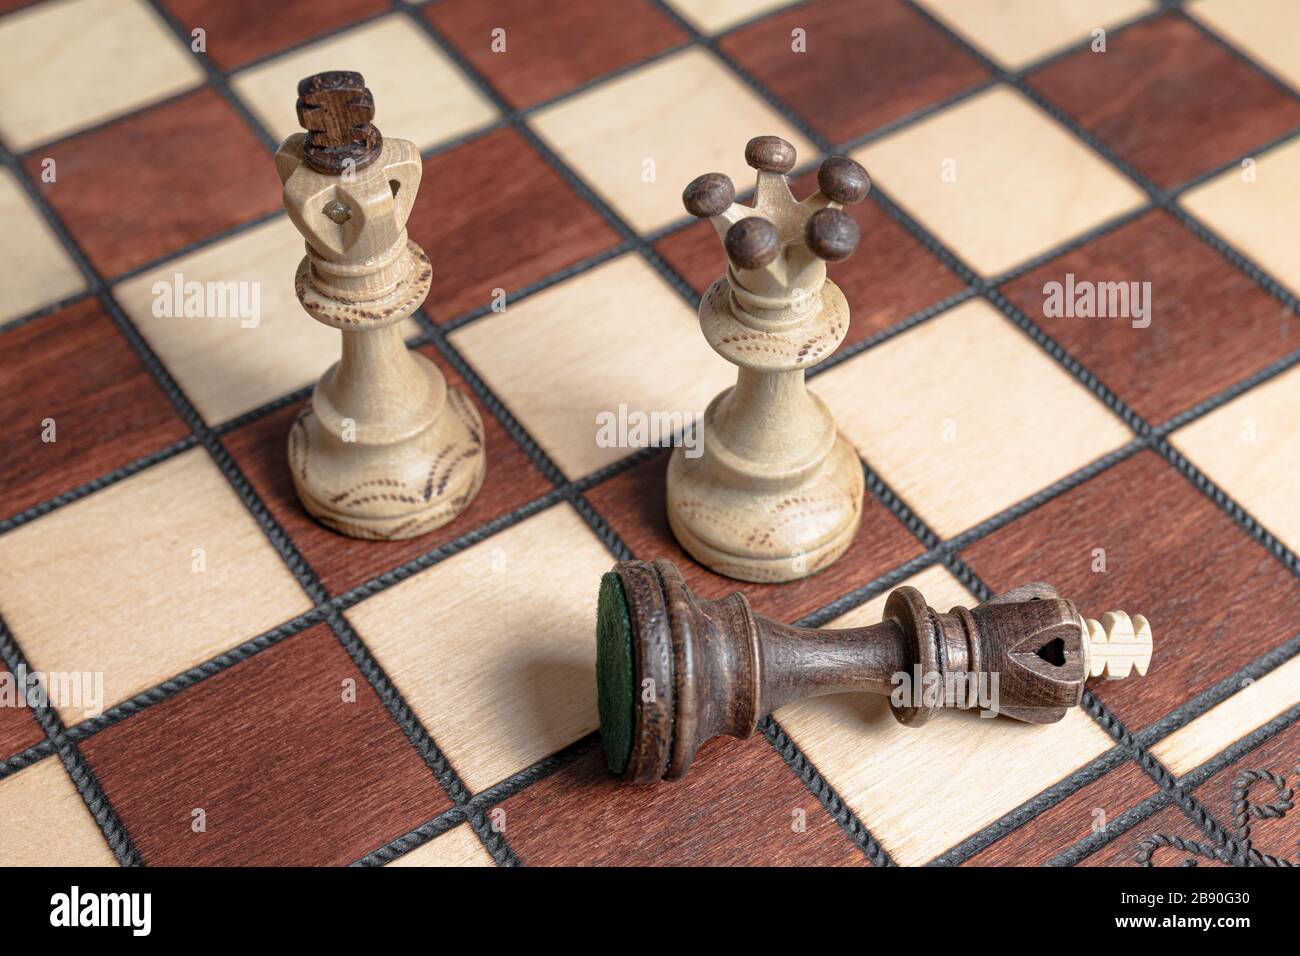 Chess situation where black player is defeated through checkmate. Royalty free stock photo. Stock Photo